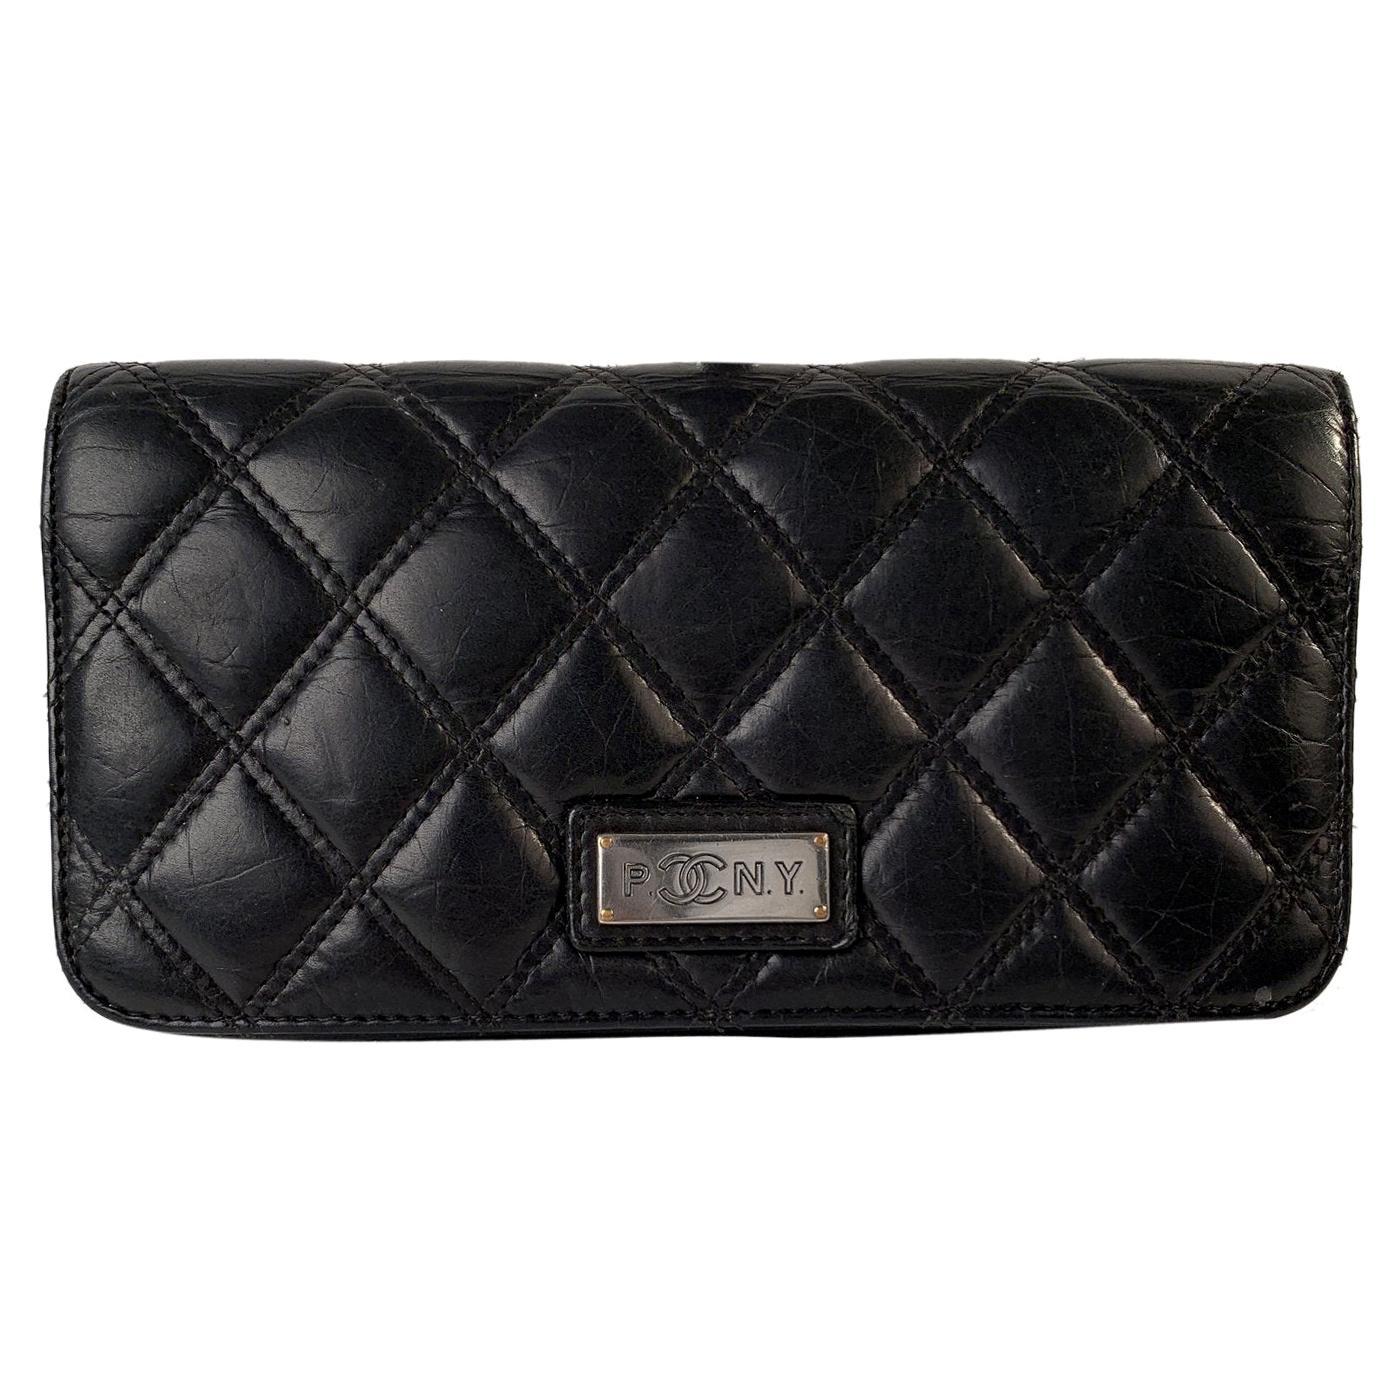 Chanel Black Aged Quilted Leather New York PNY Continental Wallet